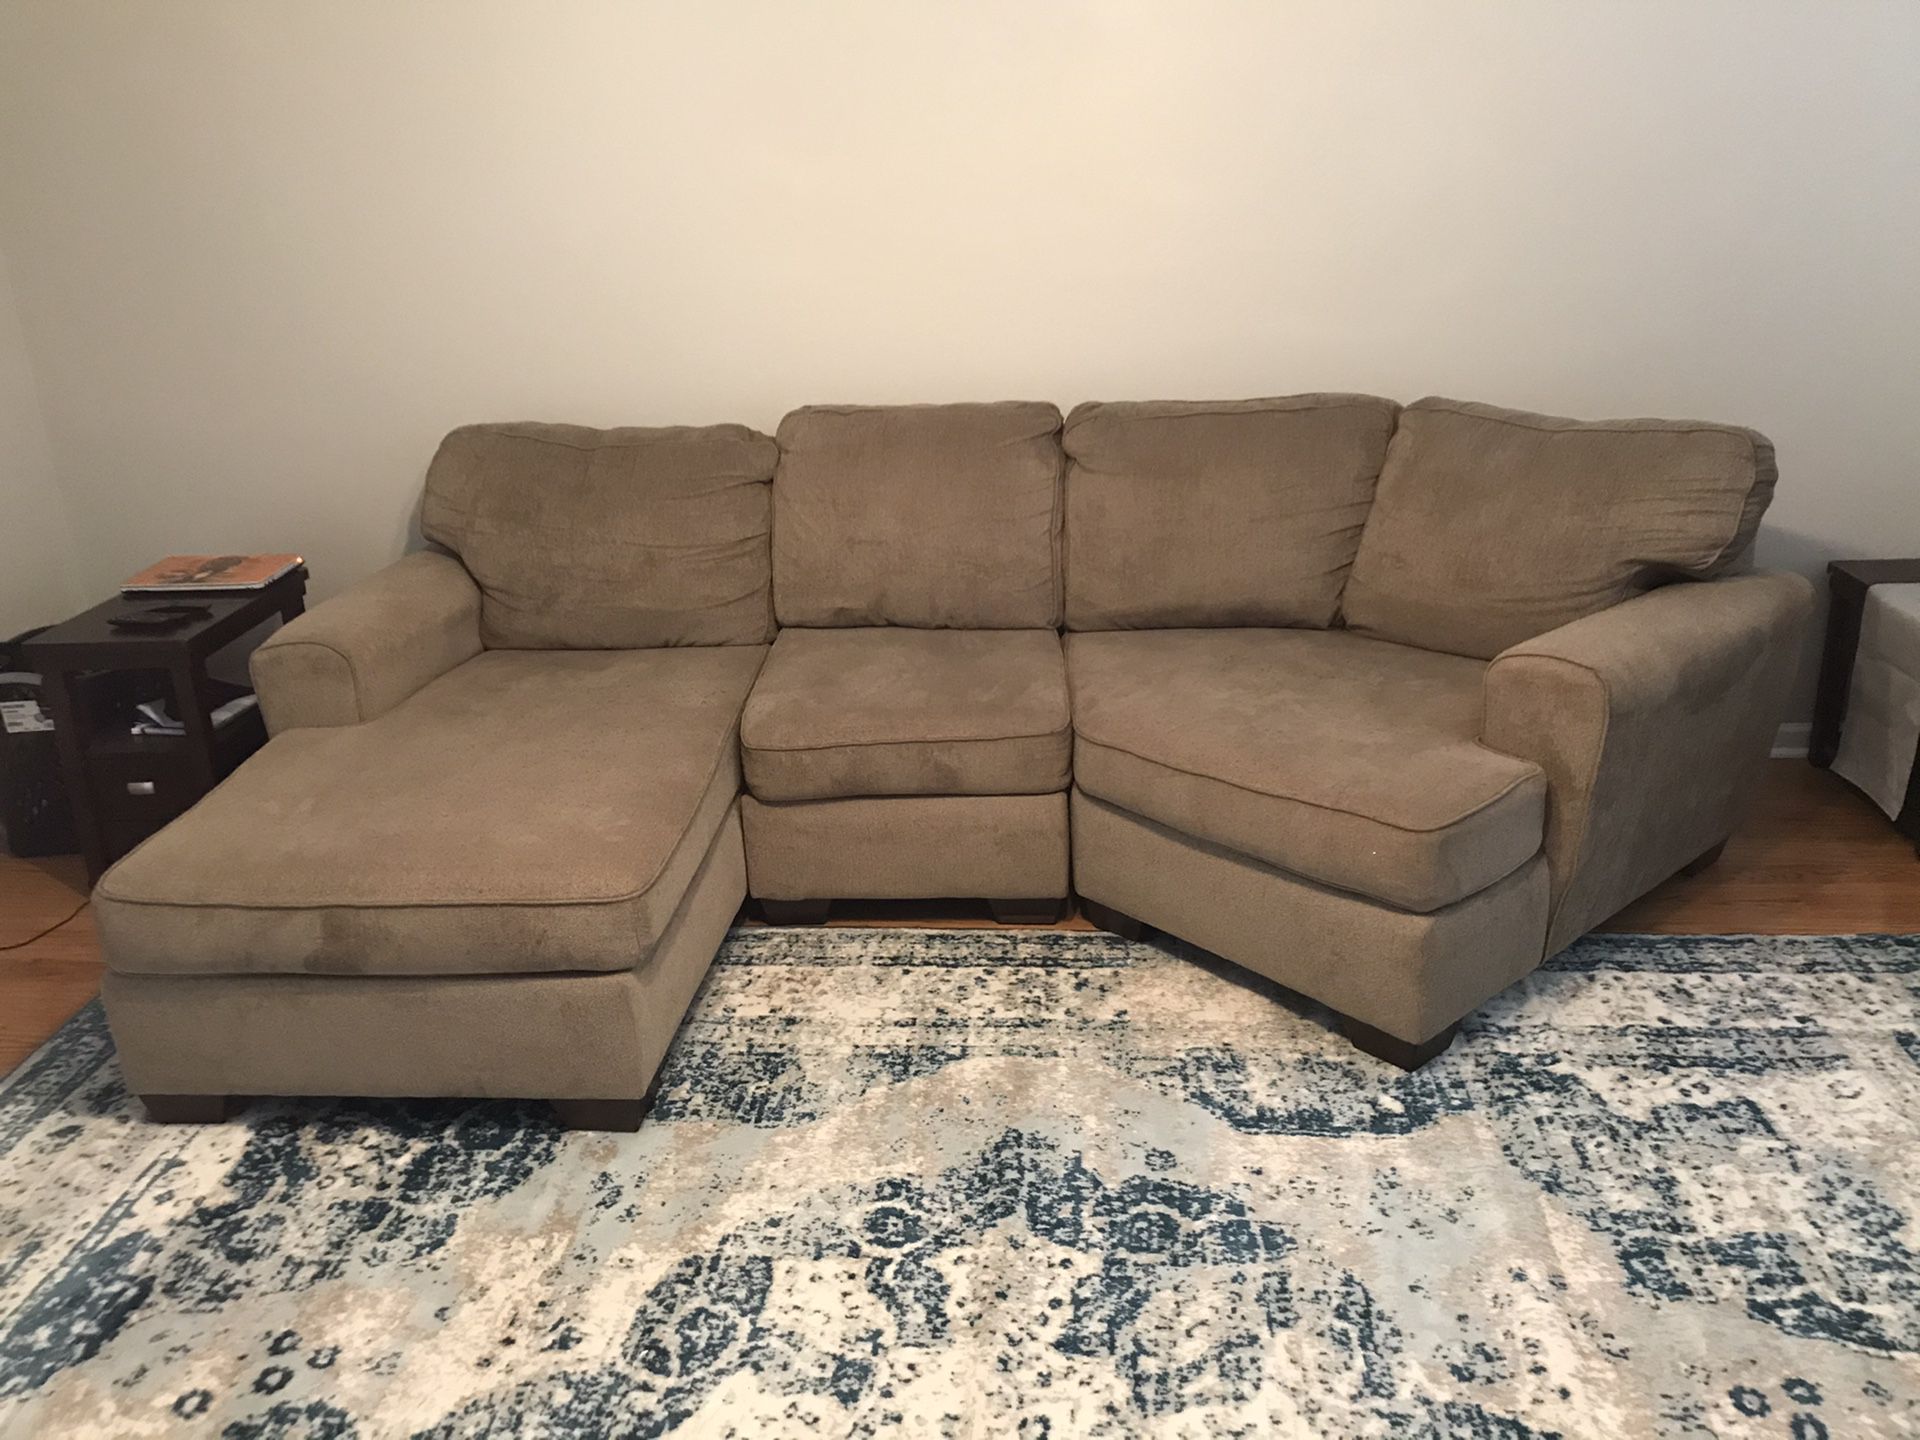 Sectional couch from Ashley